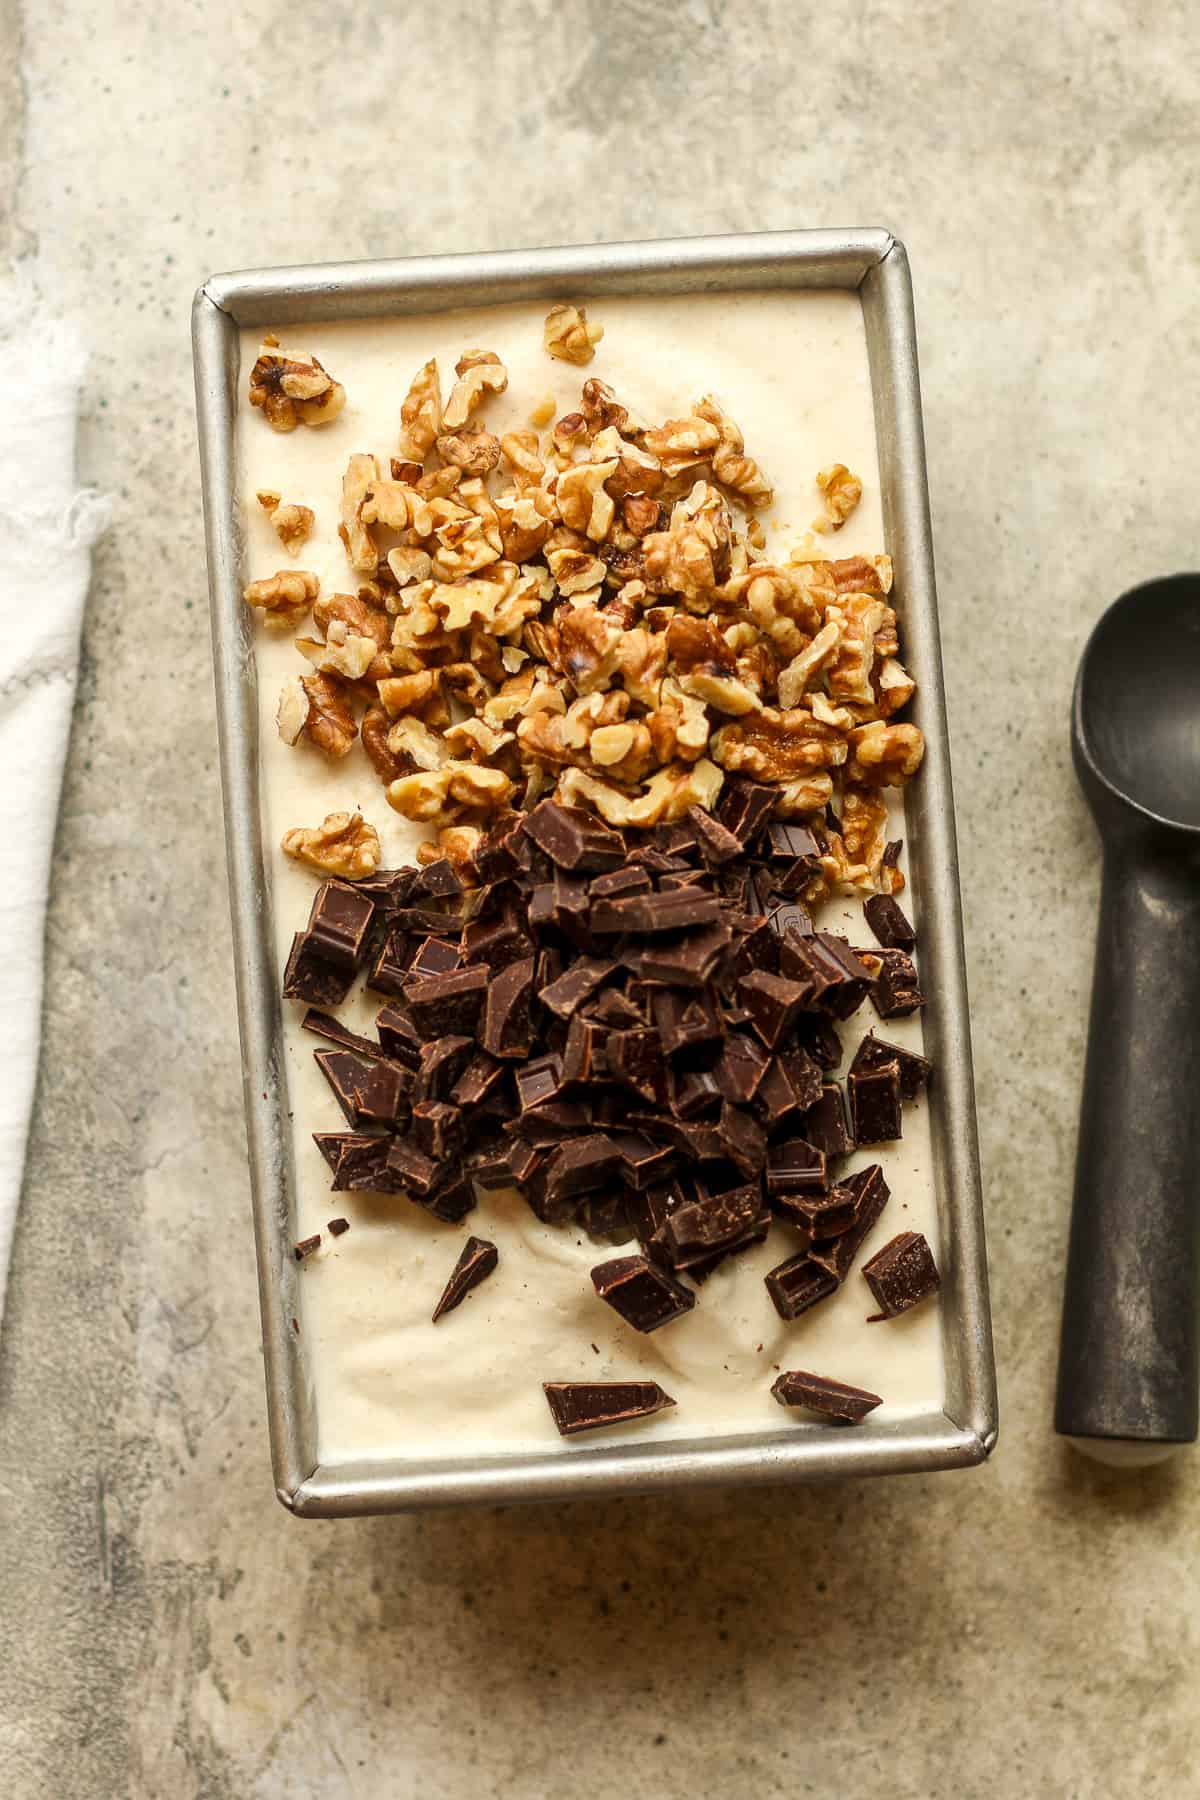 A pan of banana ice cream with walnuts and chocolate on top.